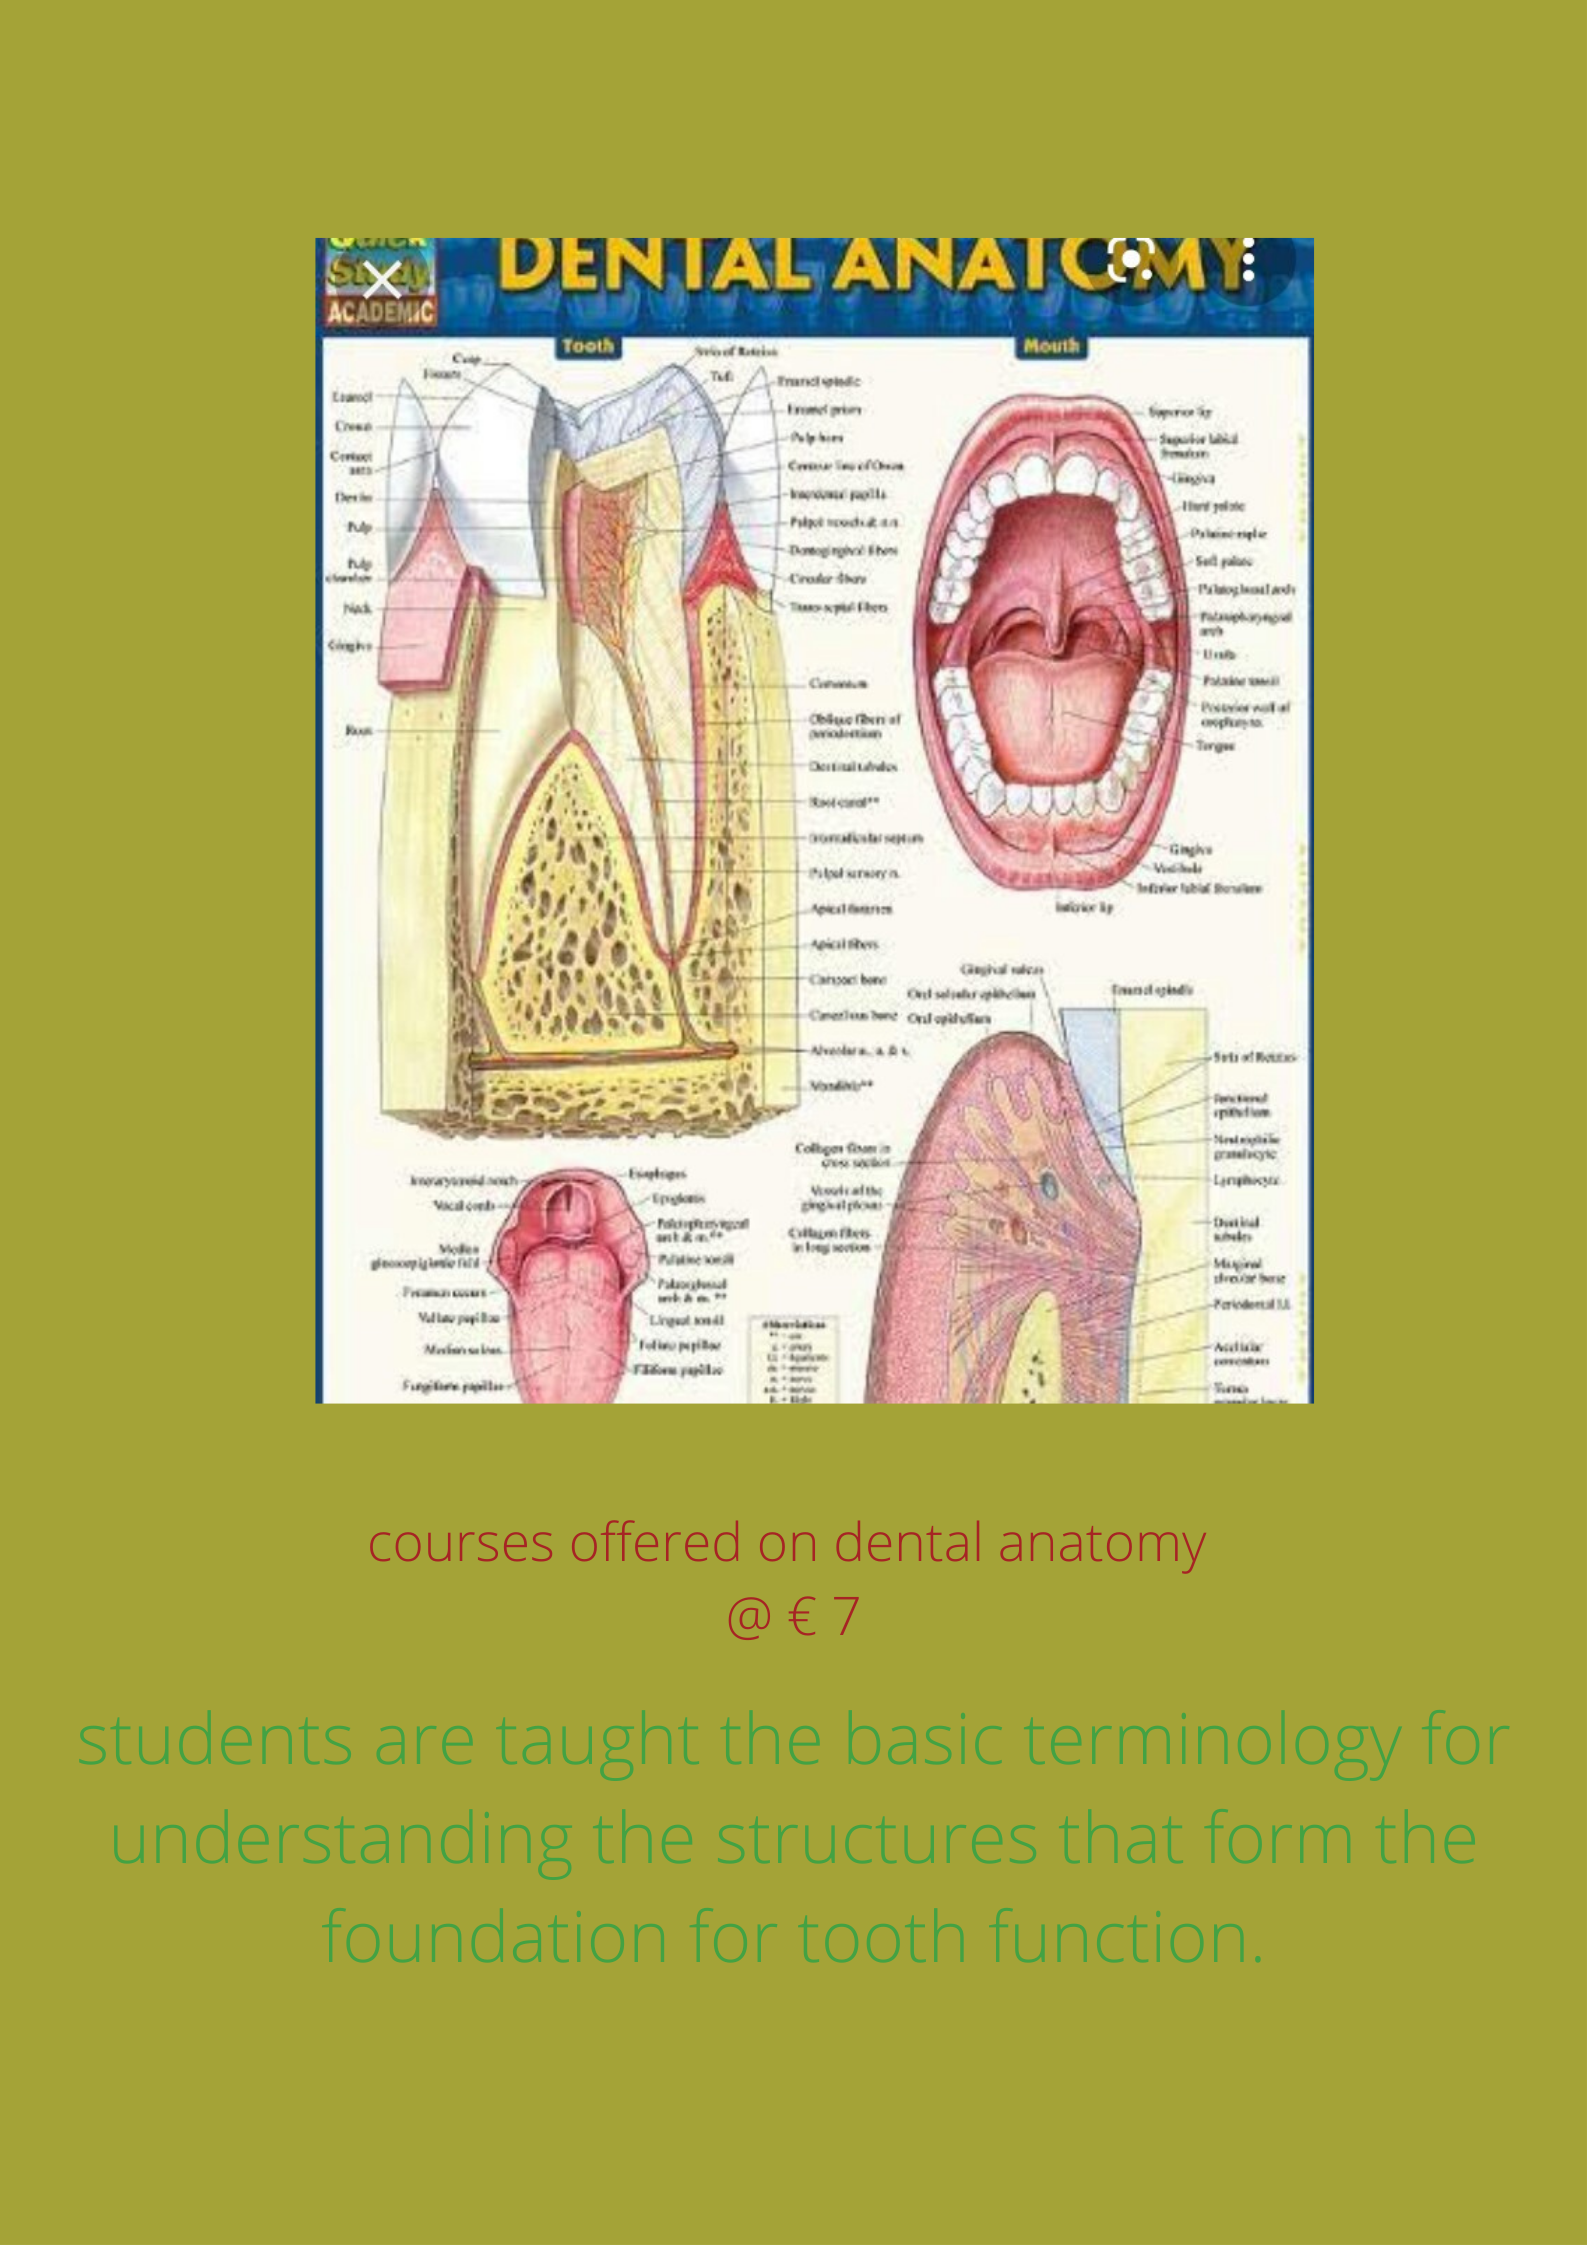 dental anatomy course offered